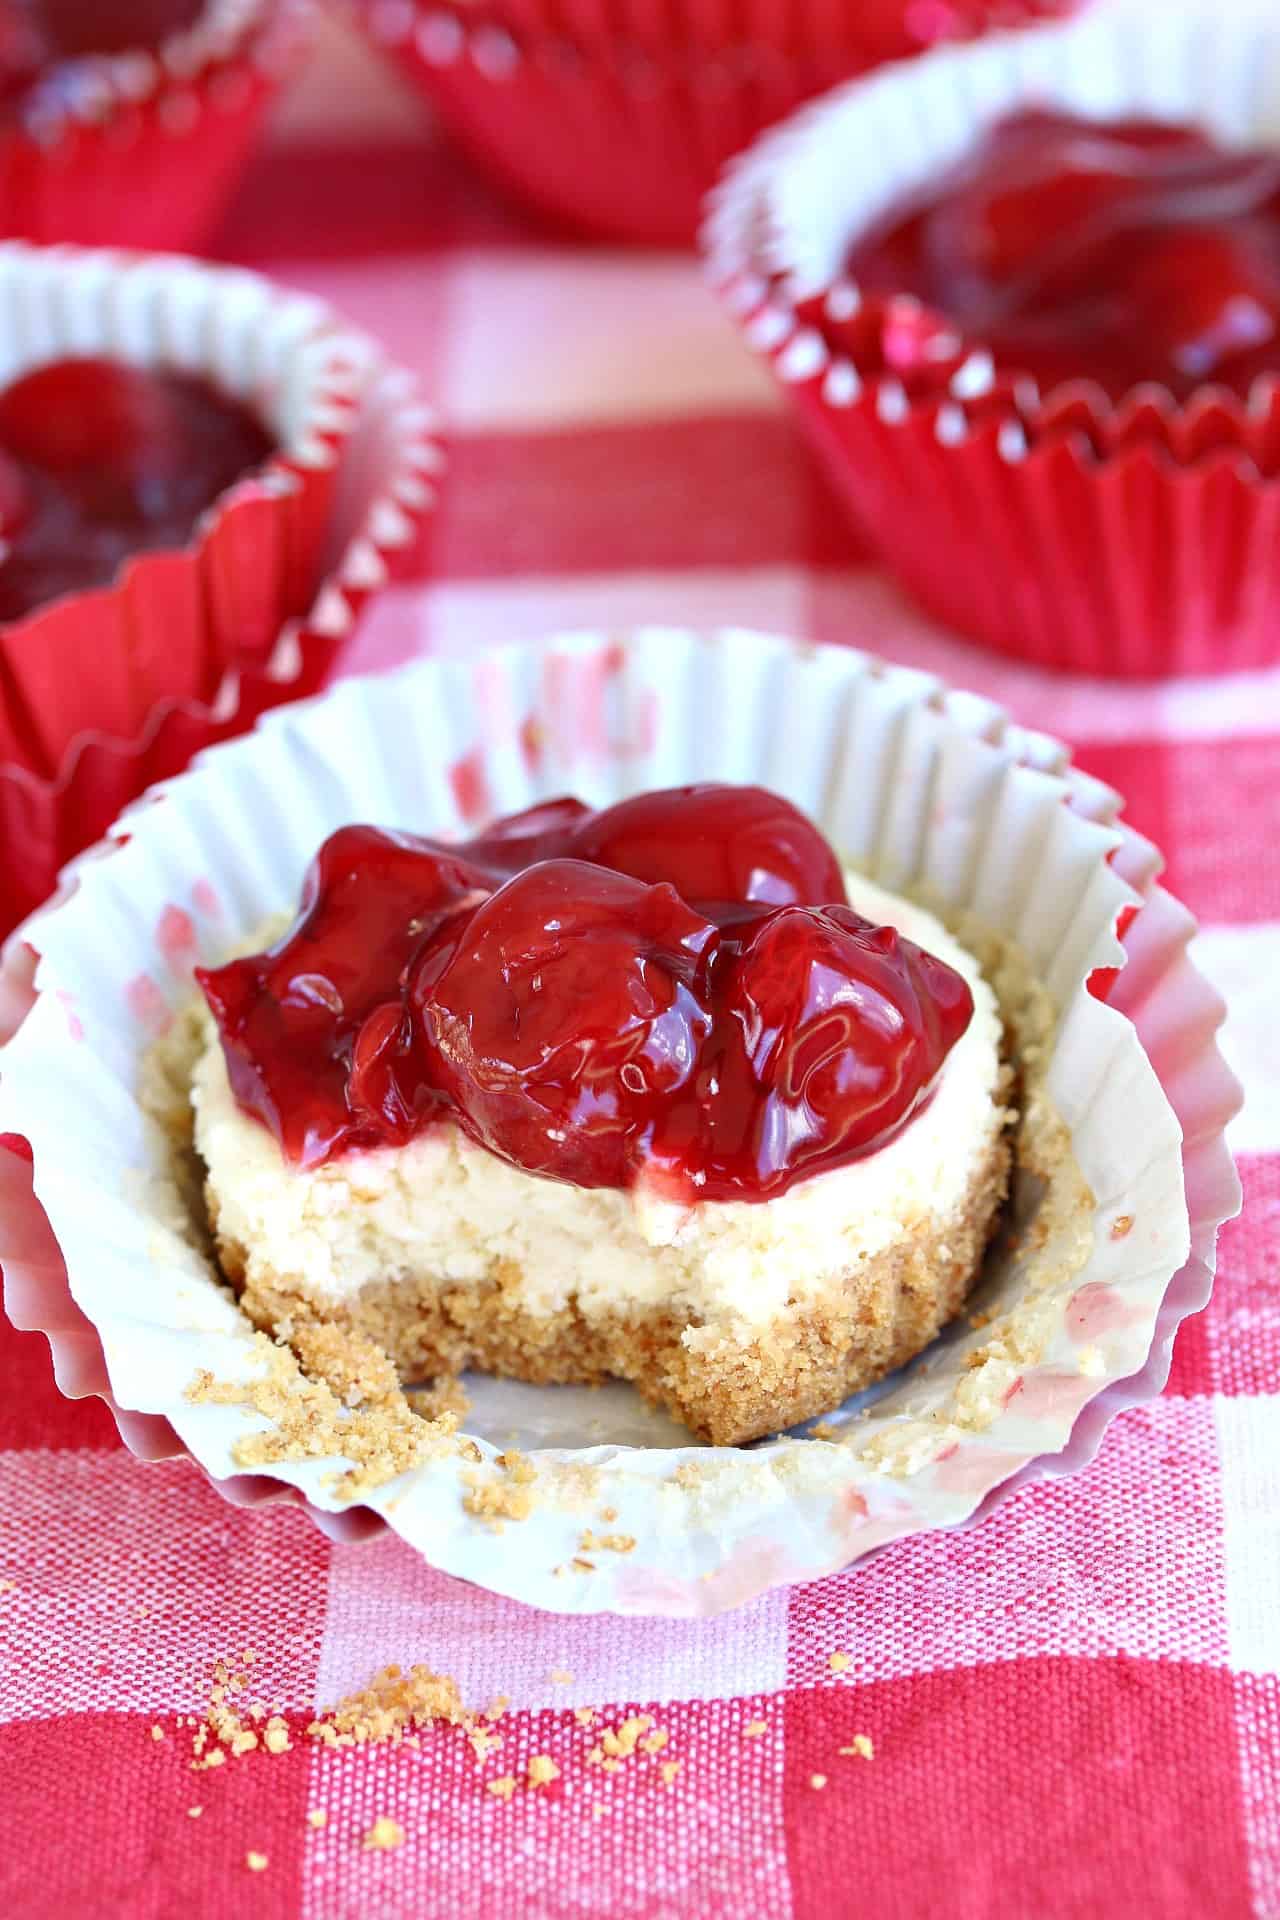 A cherry cheesecake cupcake with a bite taken out of it on a red checkered surface.